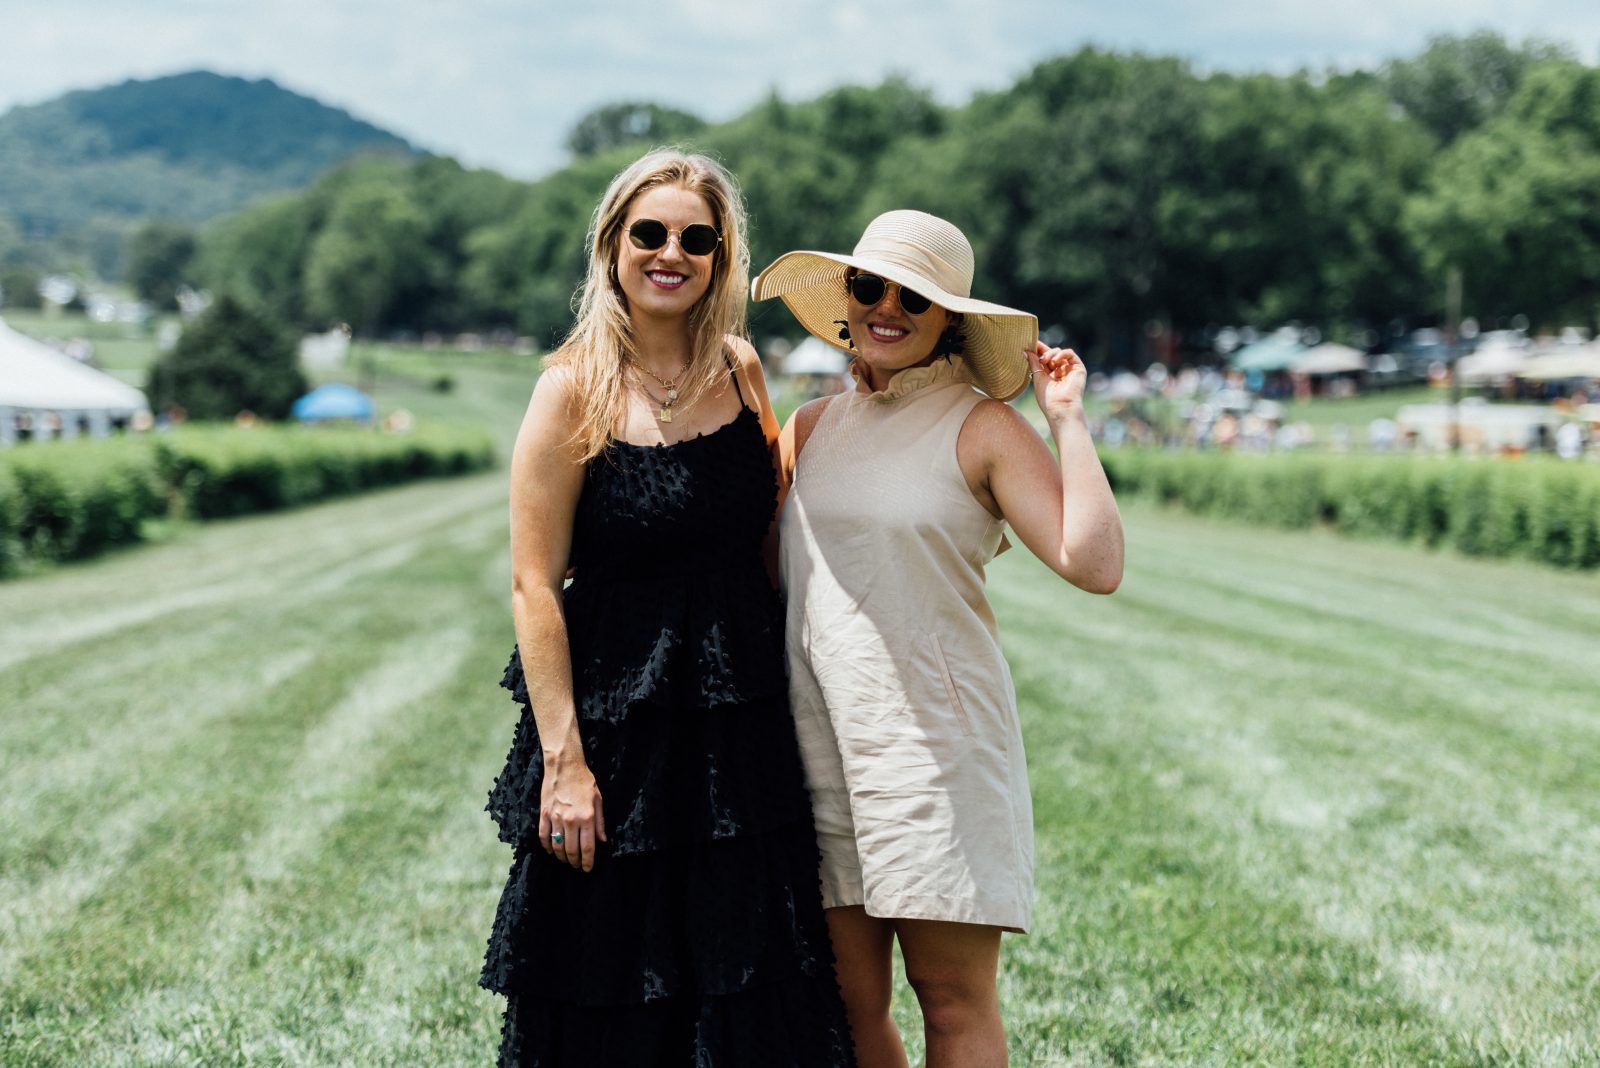 Sarah Forbes and Brady Diaz-Barriga at the Nashville Edit's Tennessee Steeplechase 2021 outdoor fashion show